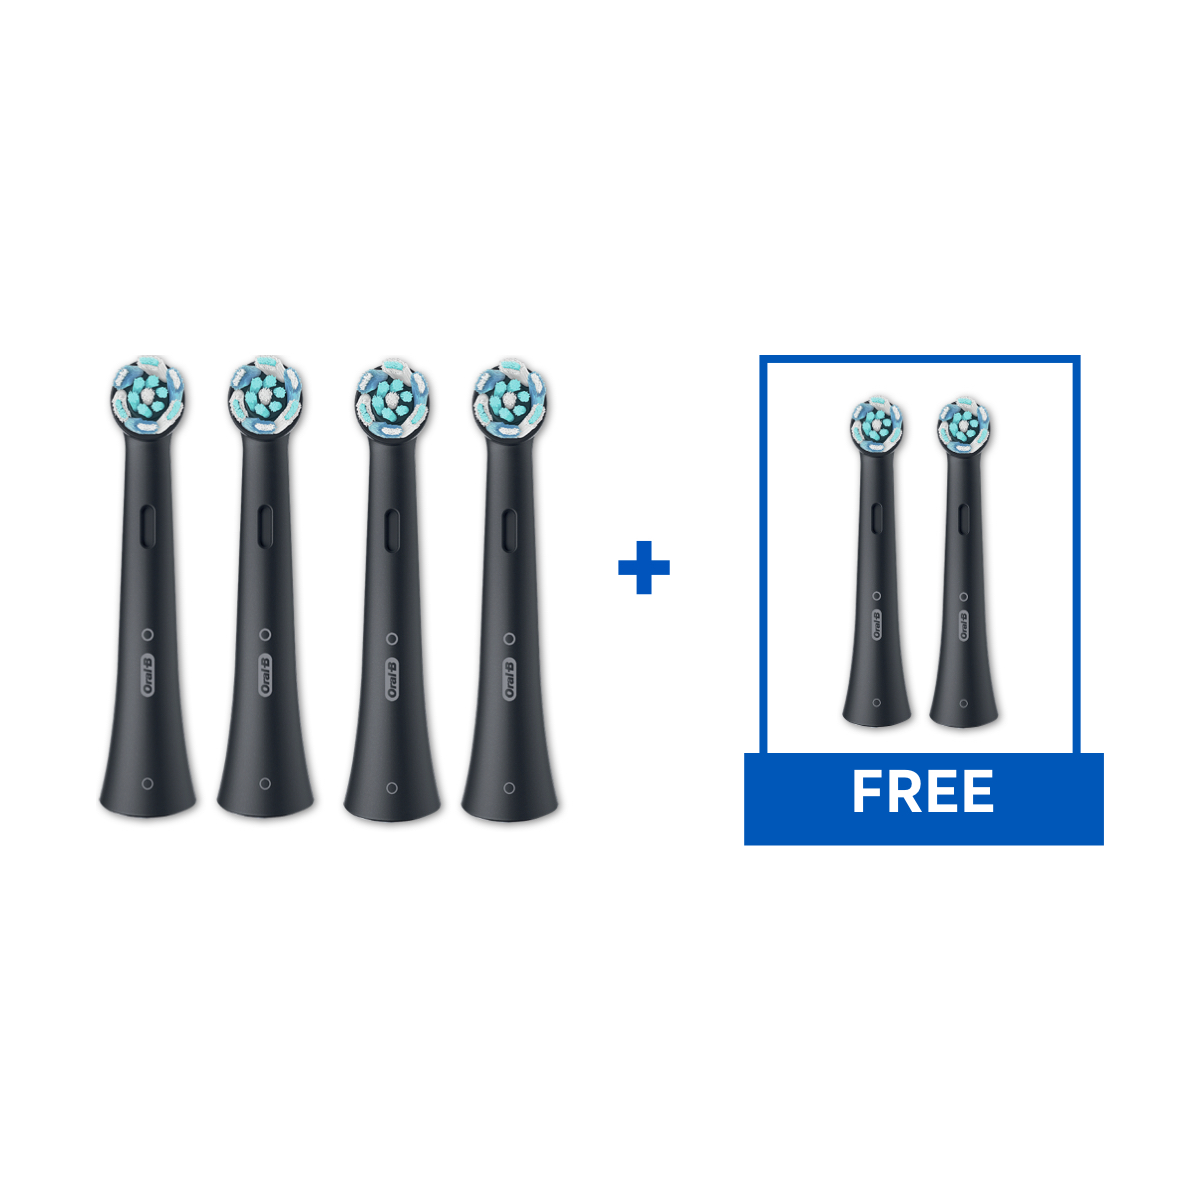 Oral-B iO Ultimate Clean Replacement Brush Heads, 6 Count Black